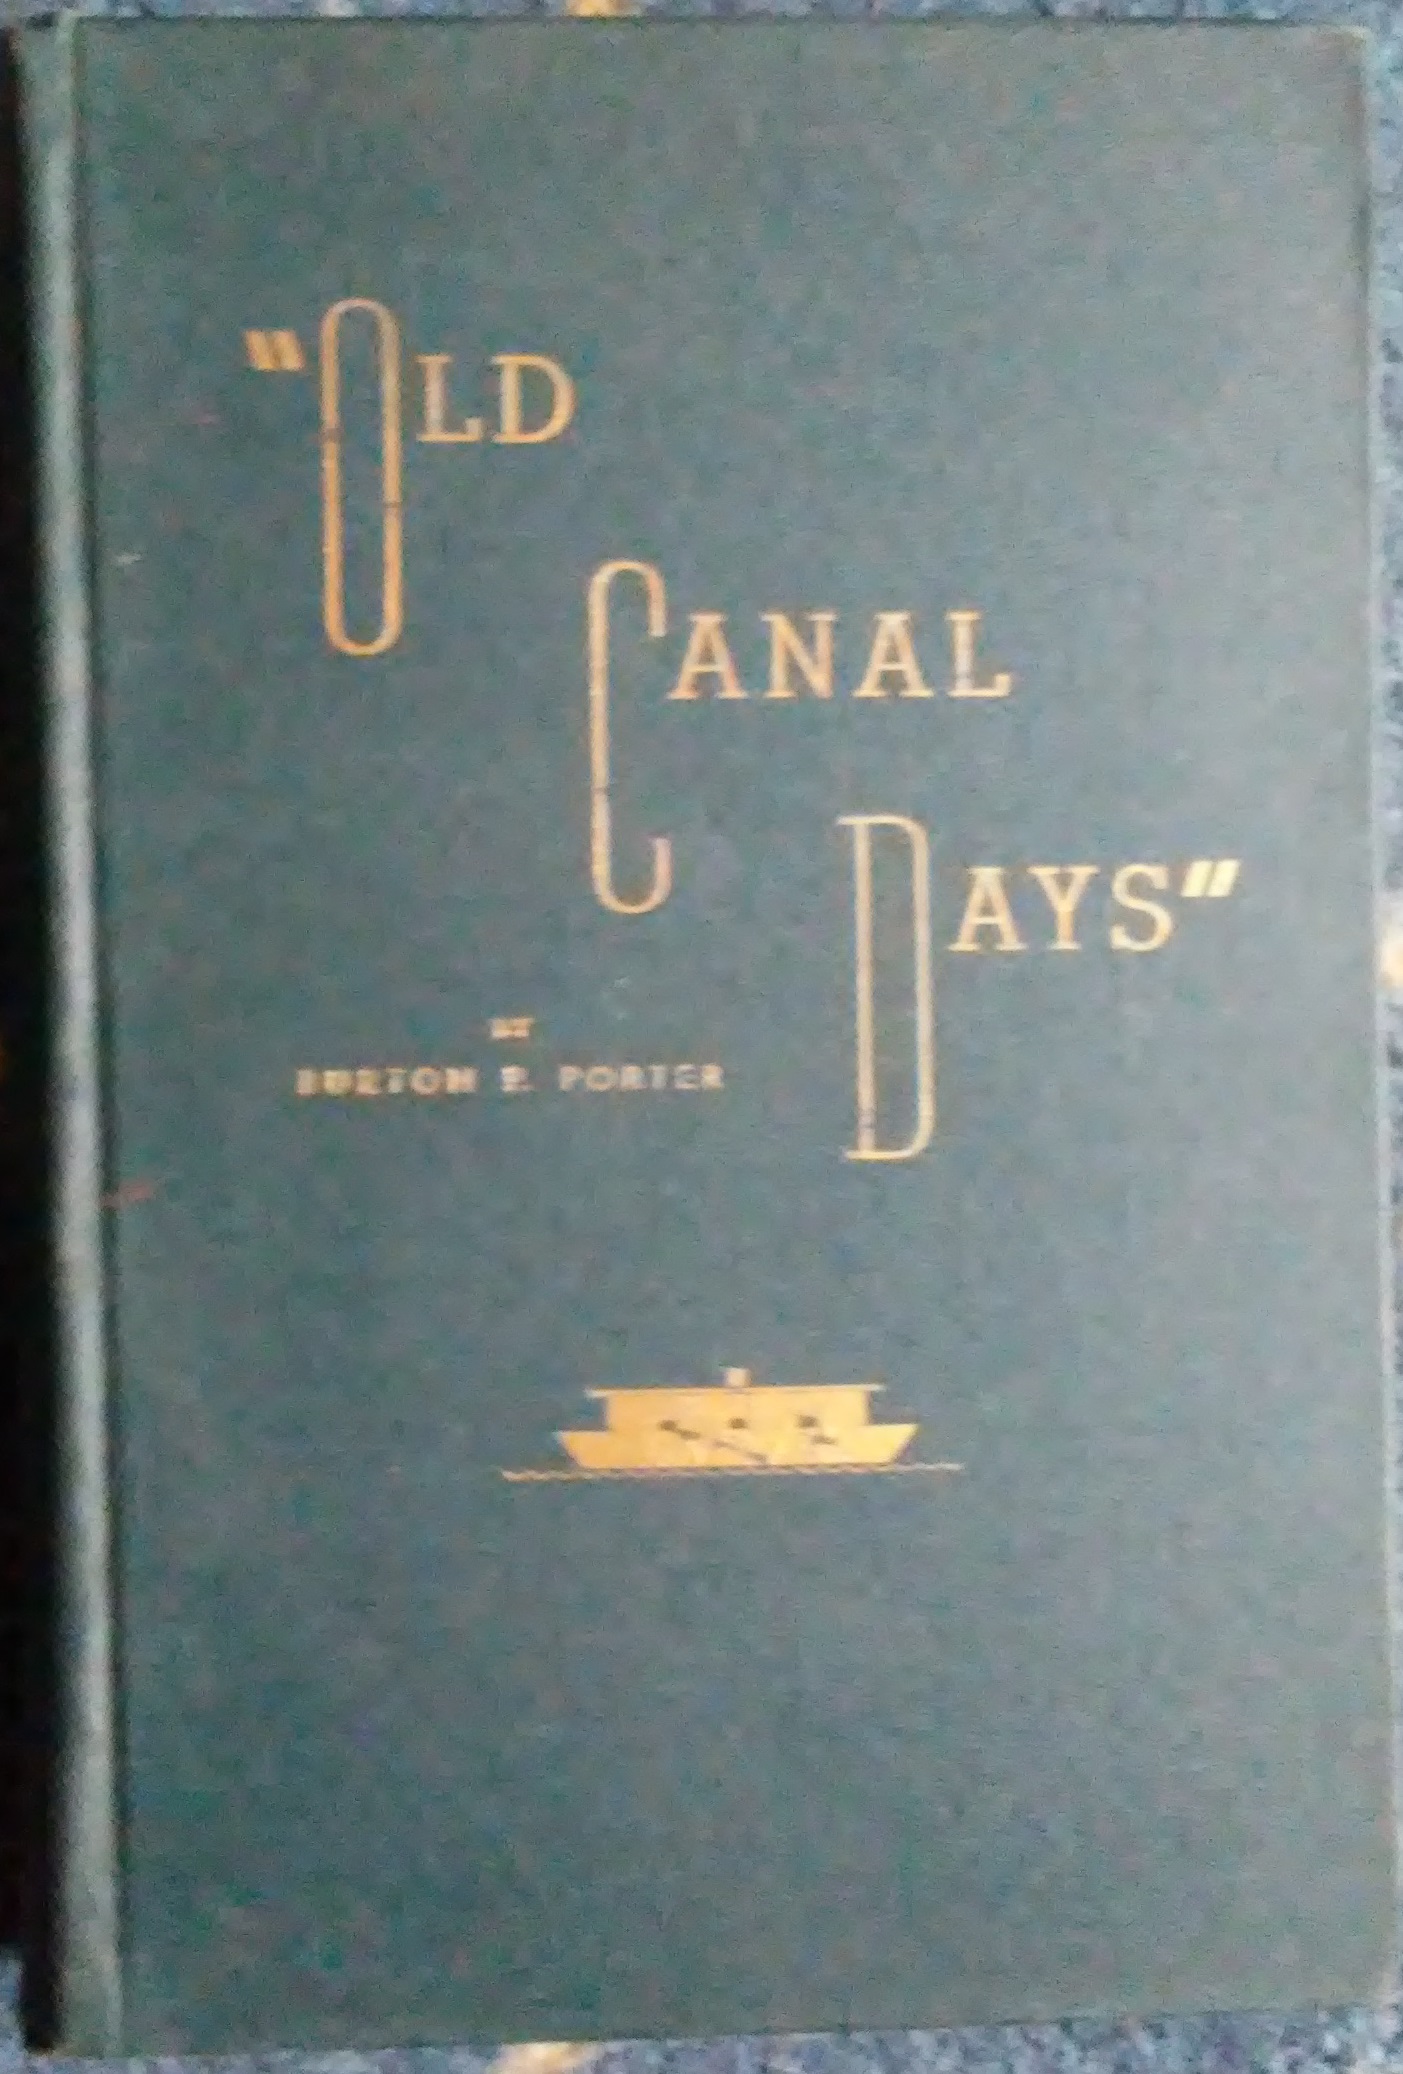 Old Canal Days book by Burton Porter